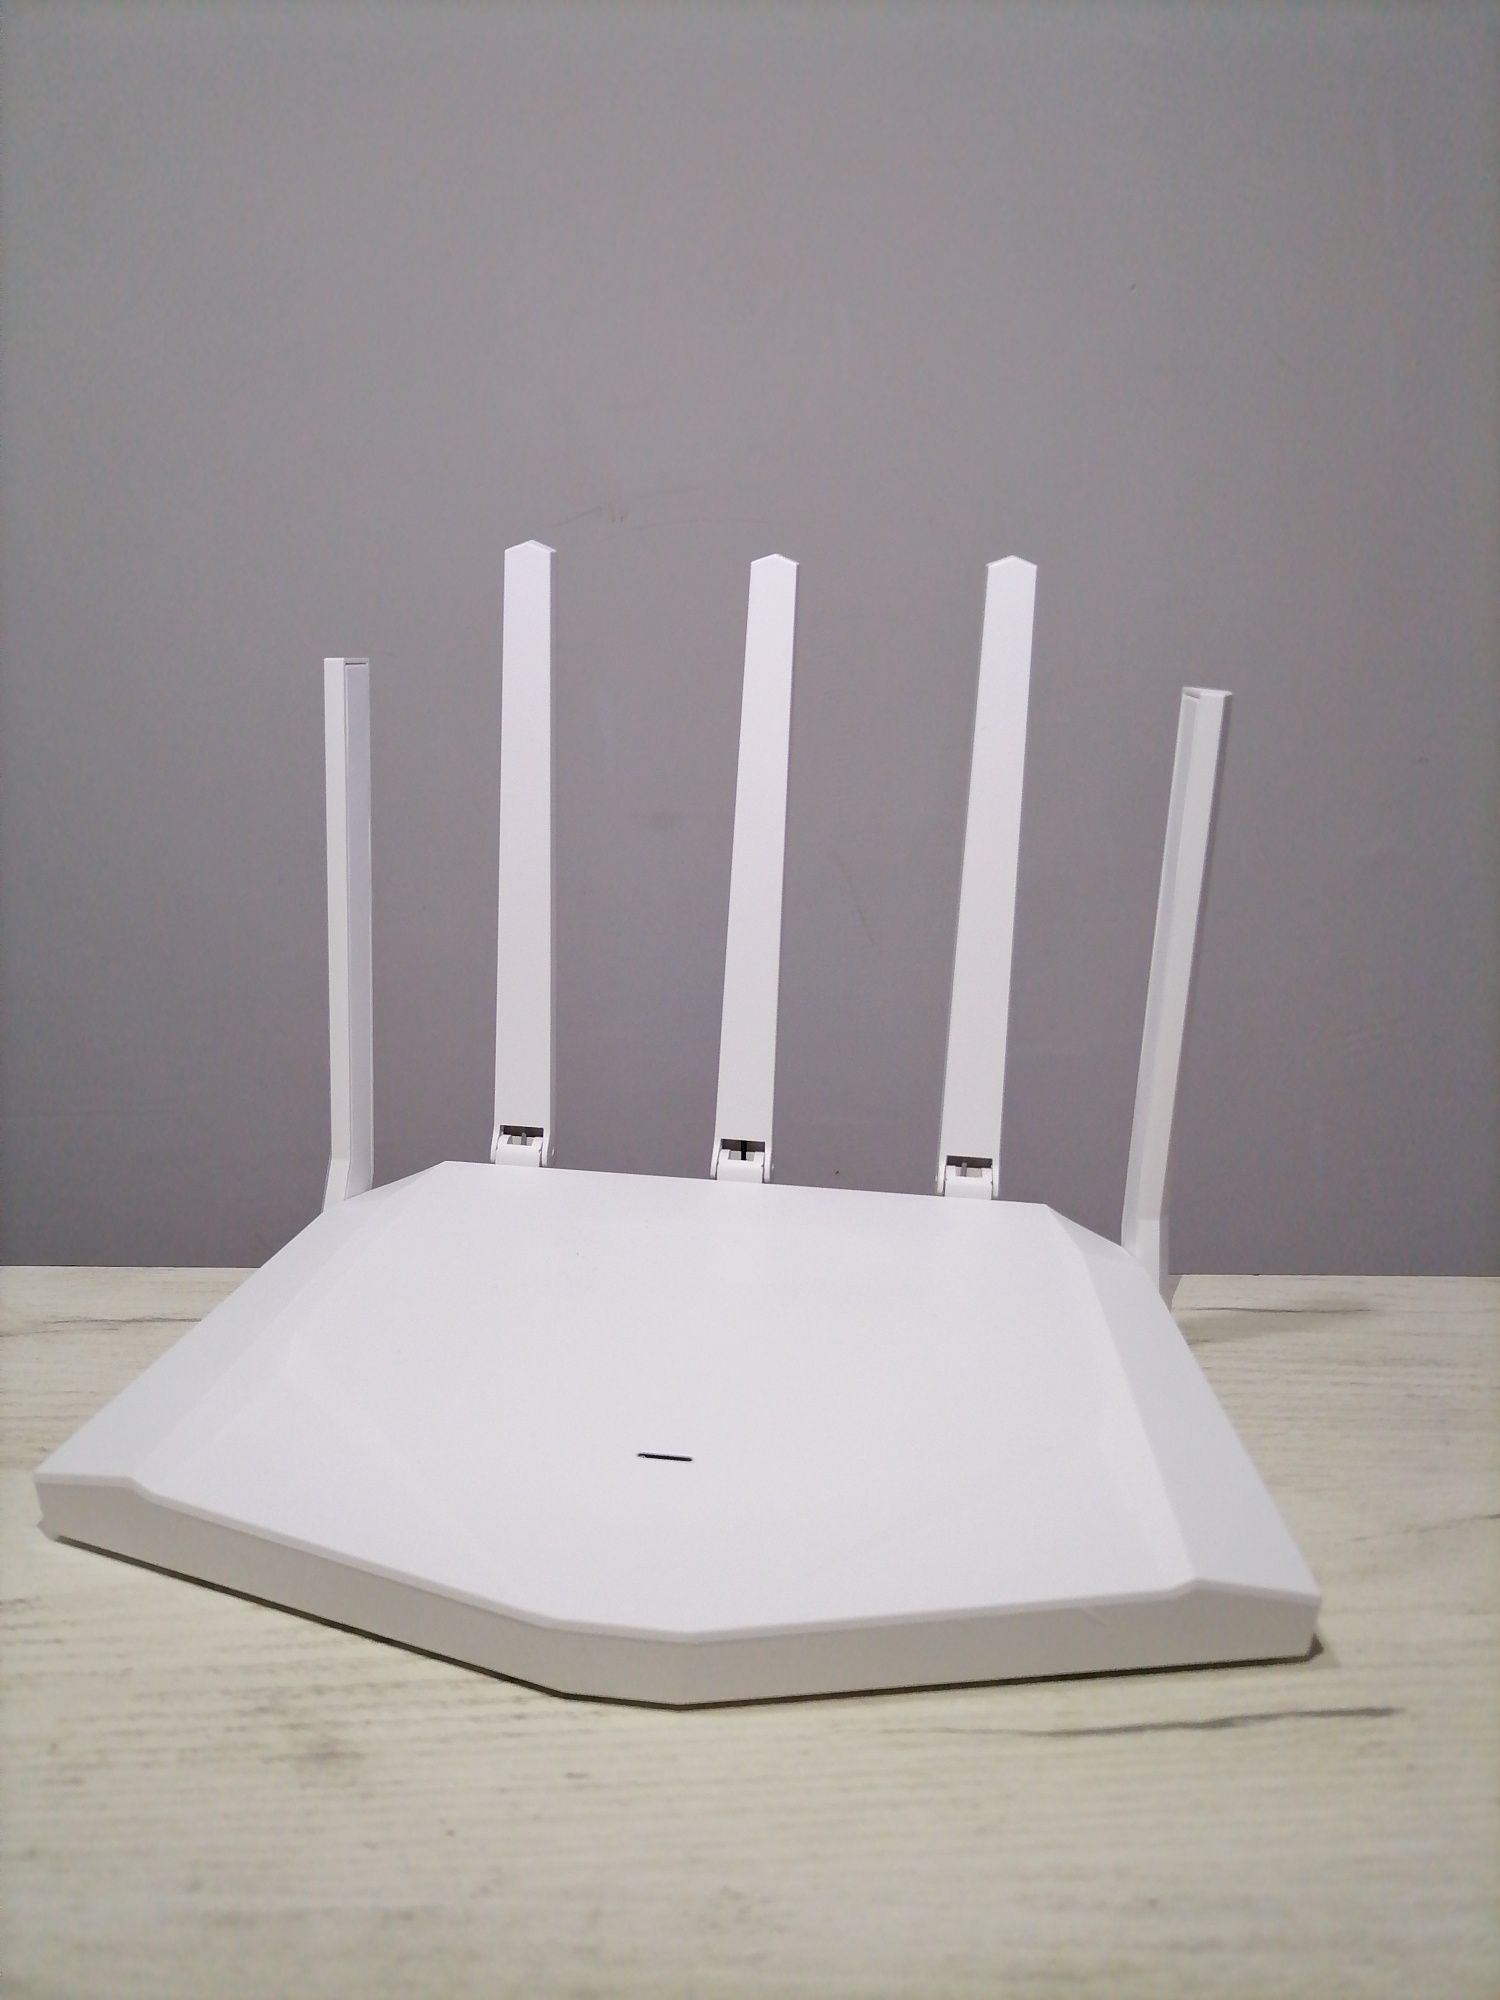 WiFi Router RX50W